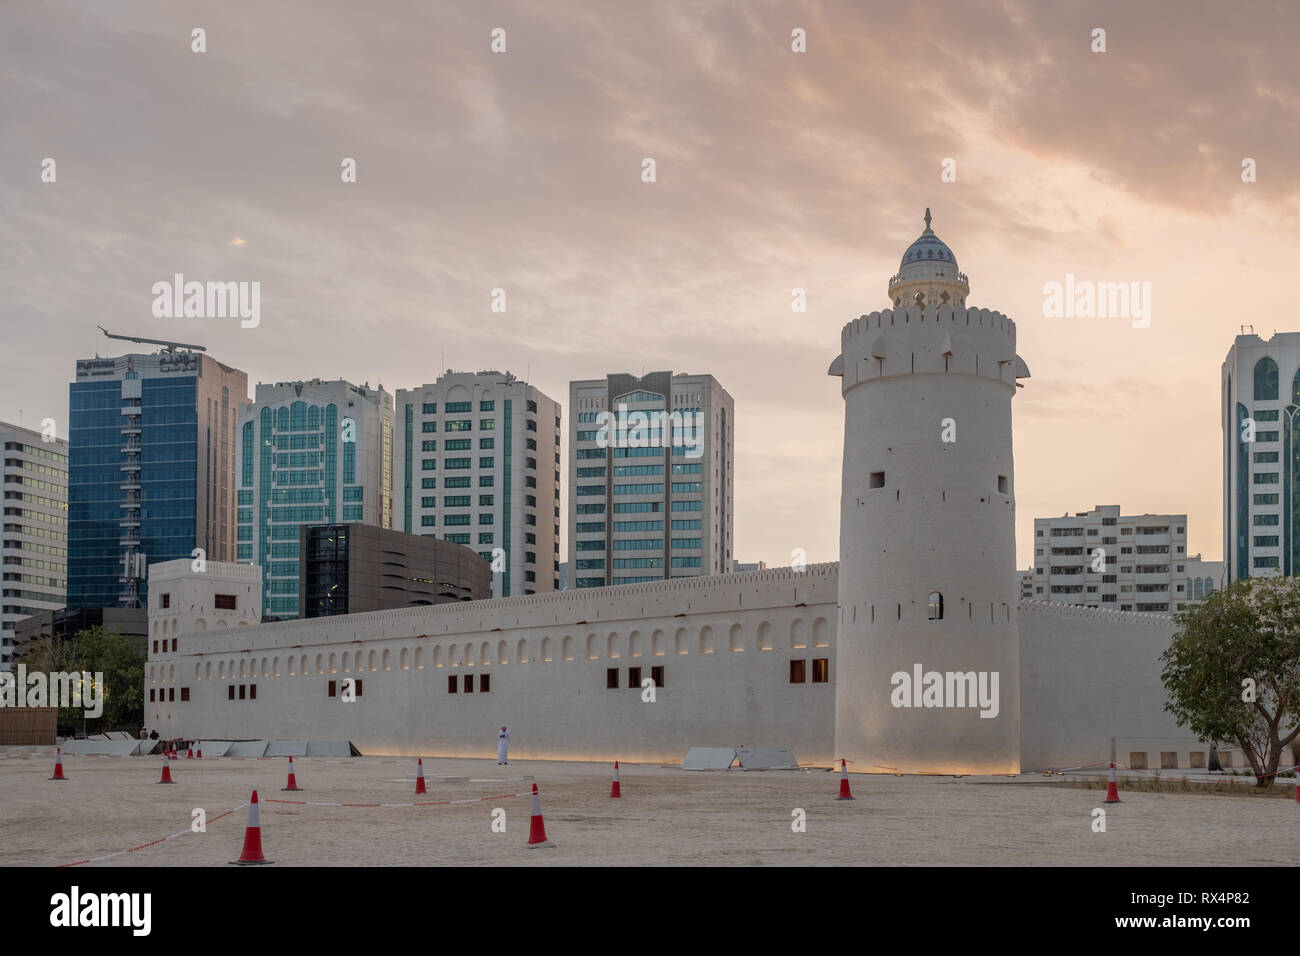 Evening View of Qasr al Hosn Abu Dhabi is a 250 years old fort, has been home to a ruling family of ABu Dhabi, UAE Stock Photo